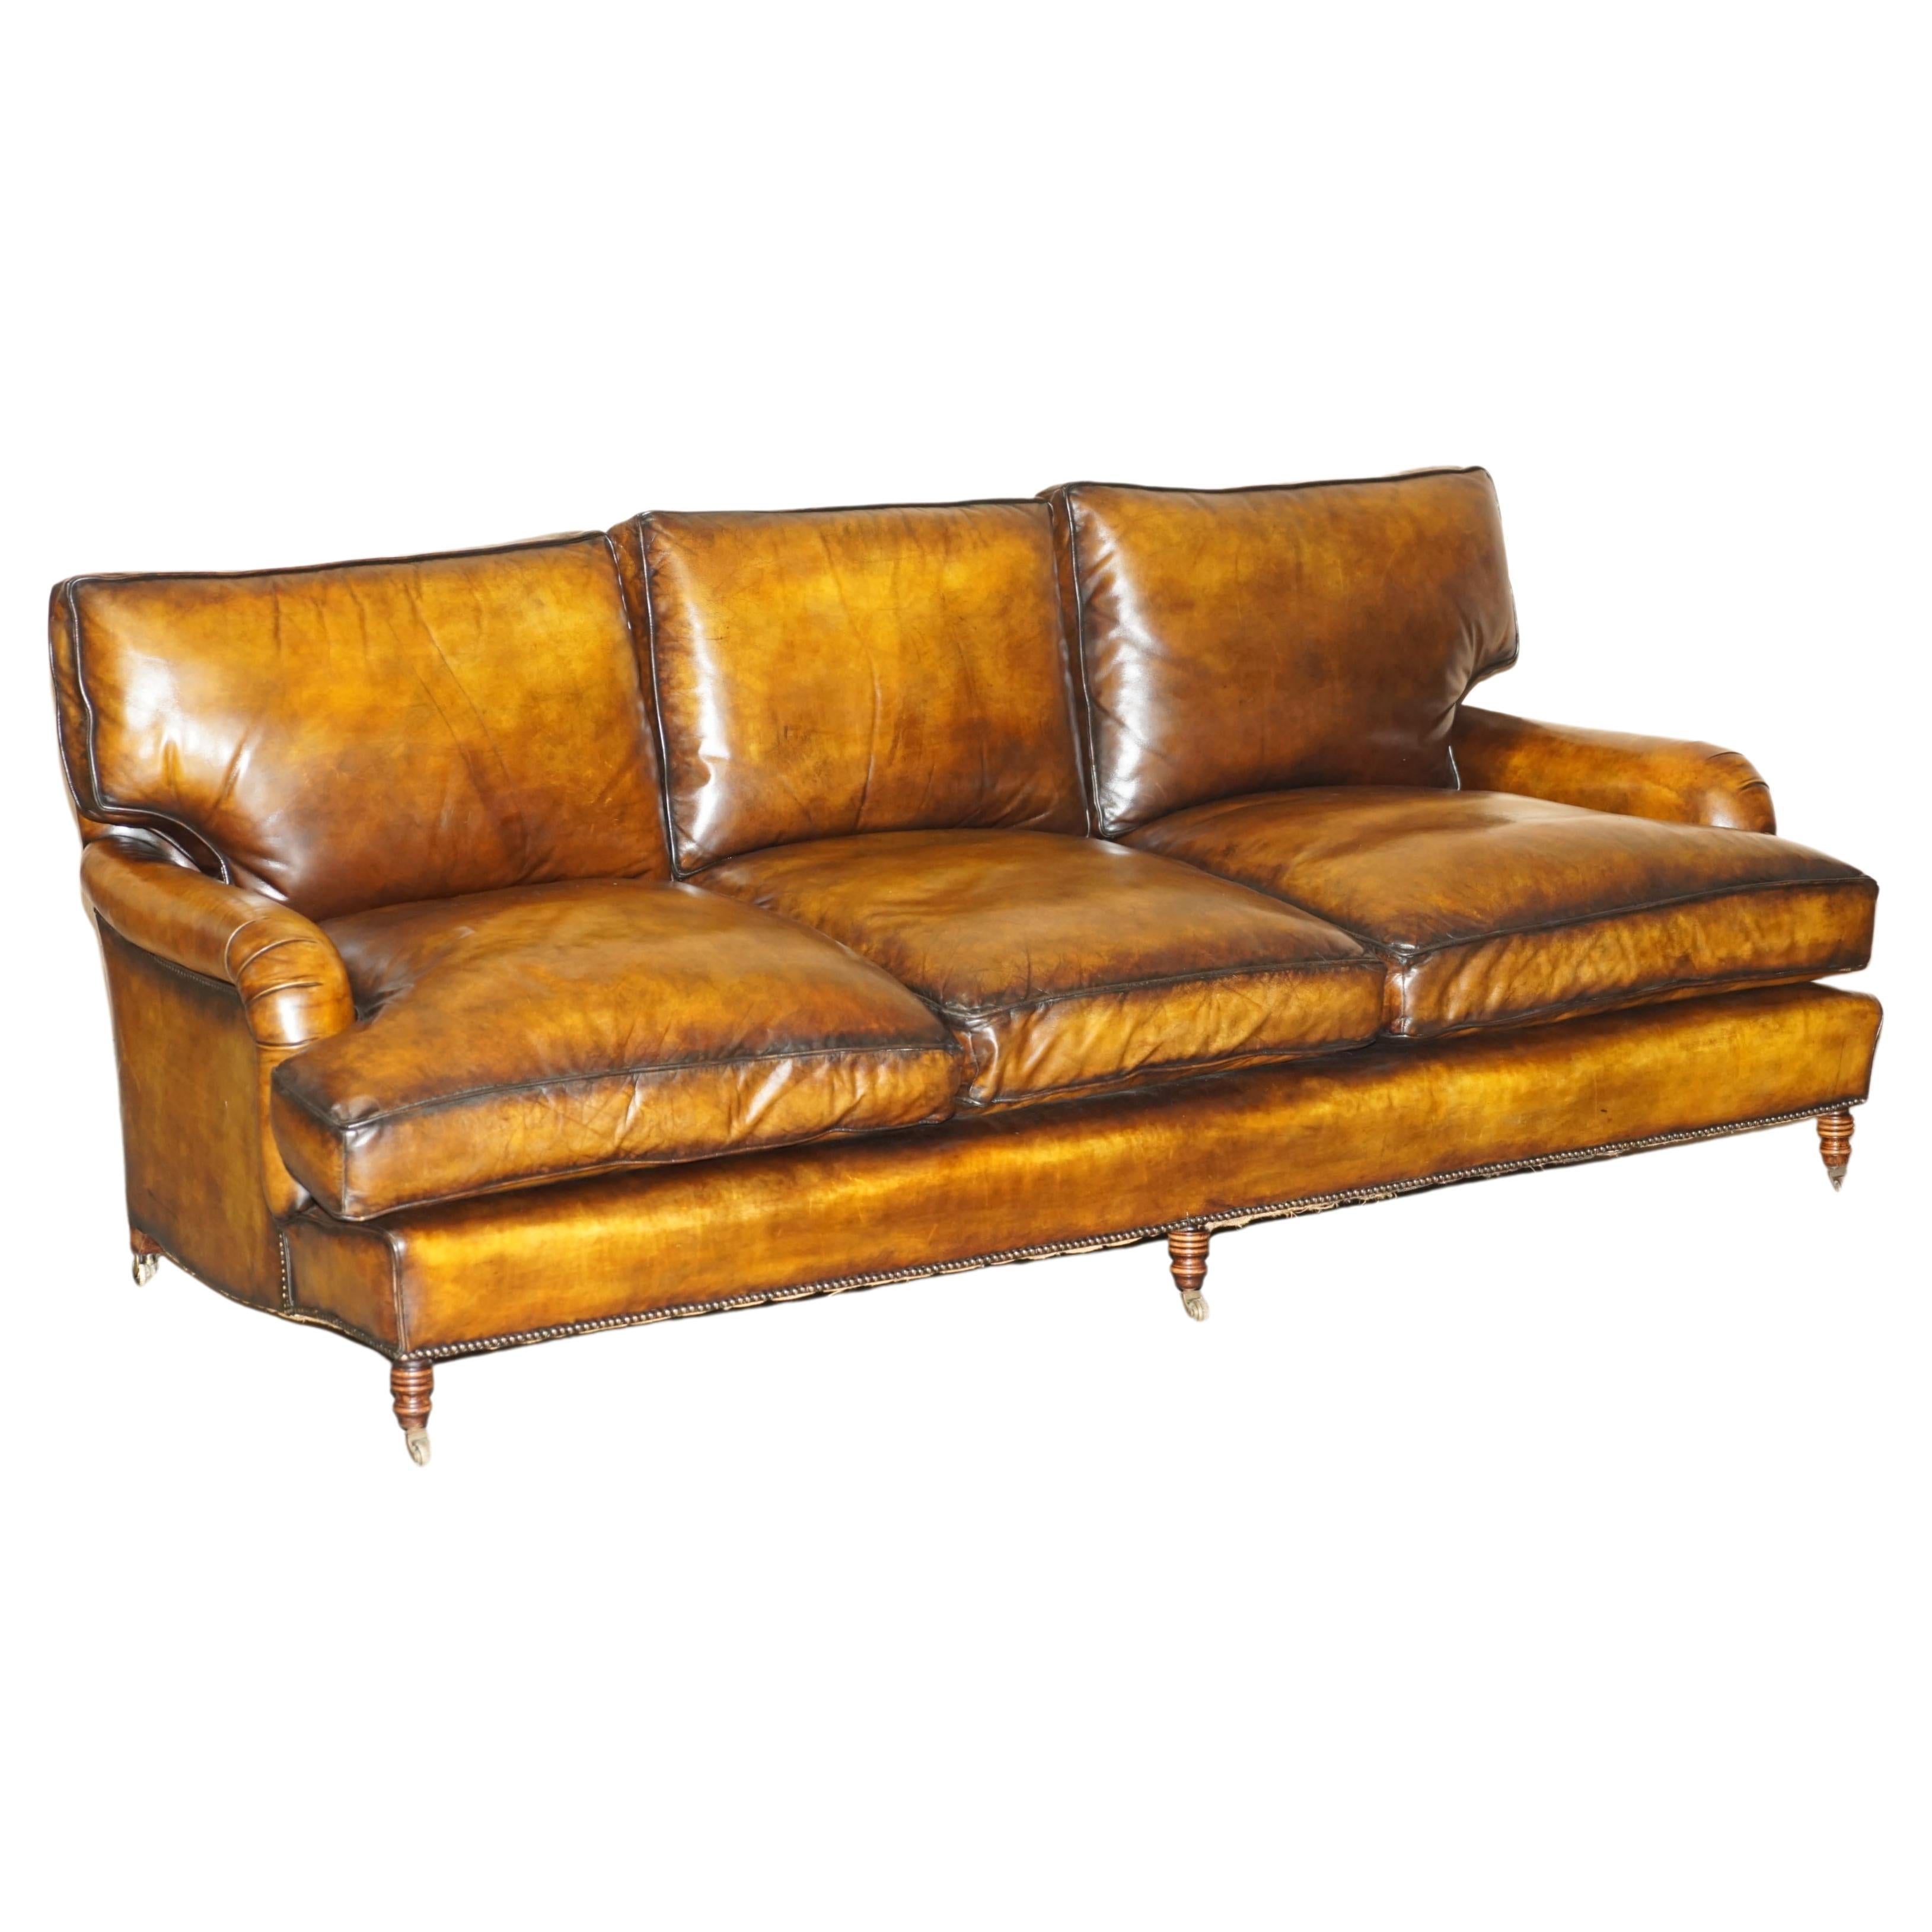 GEORGE SMITH RESTORED HOWARD & SON'S BROWN LEATHER SiGNATURE SCROLL ARM SOFA